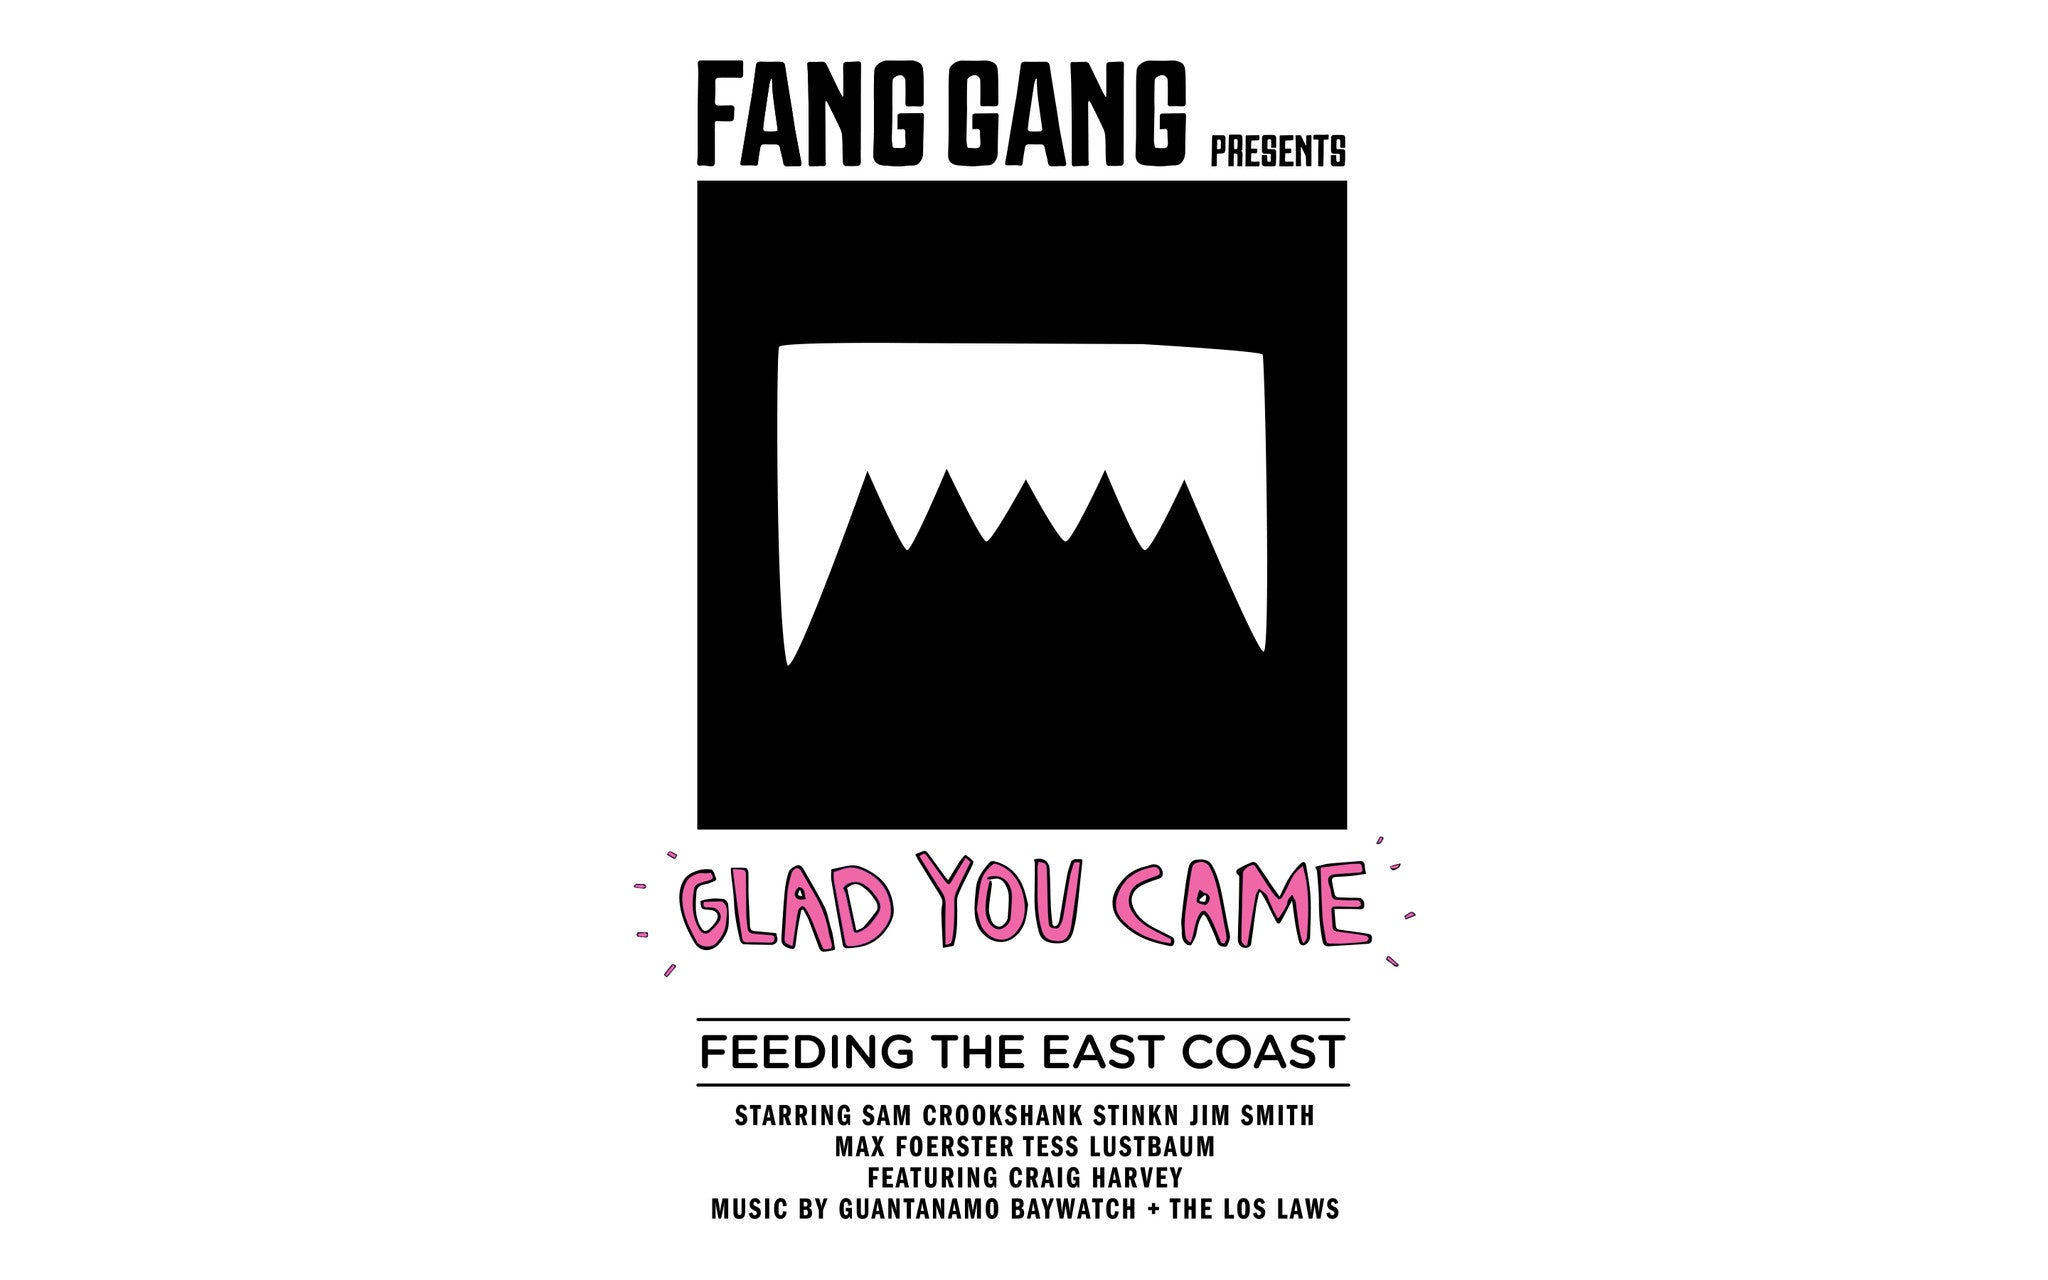 "GLAD YOU CAME" A SHORT FILM BY AIDAN STEVENS AND TEAM FANG GANG